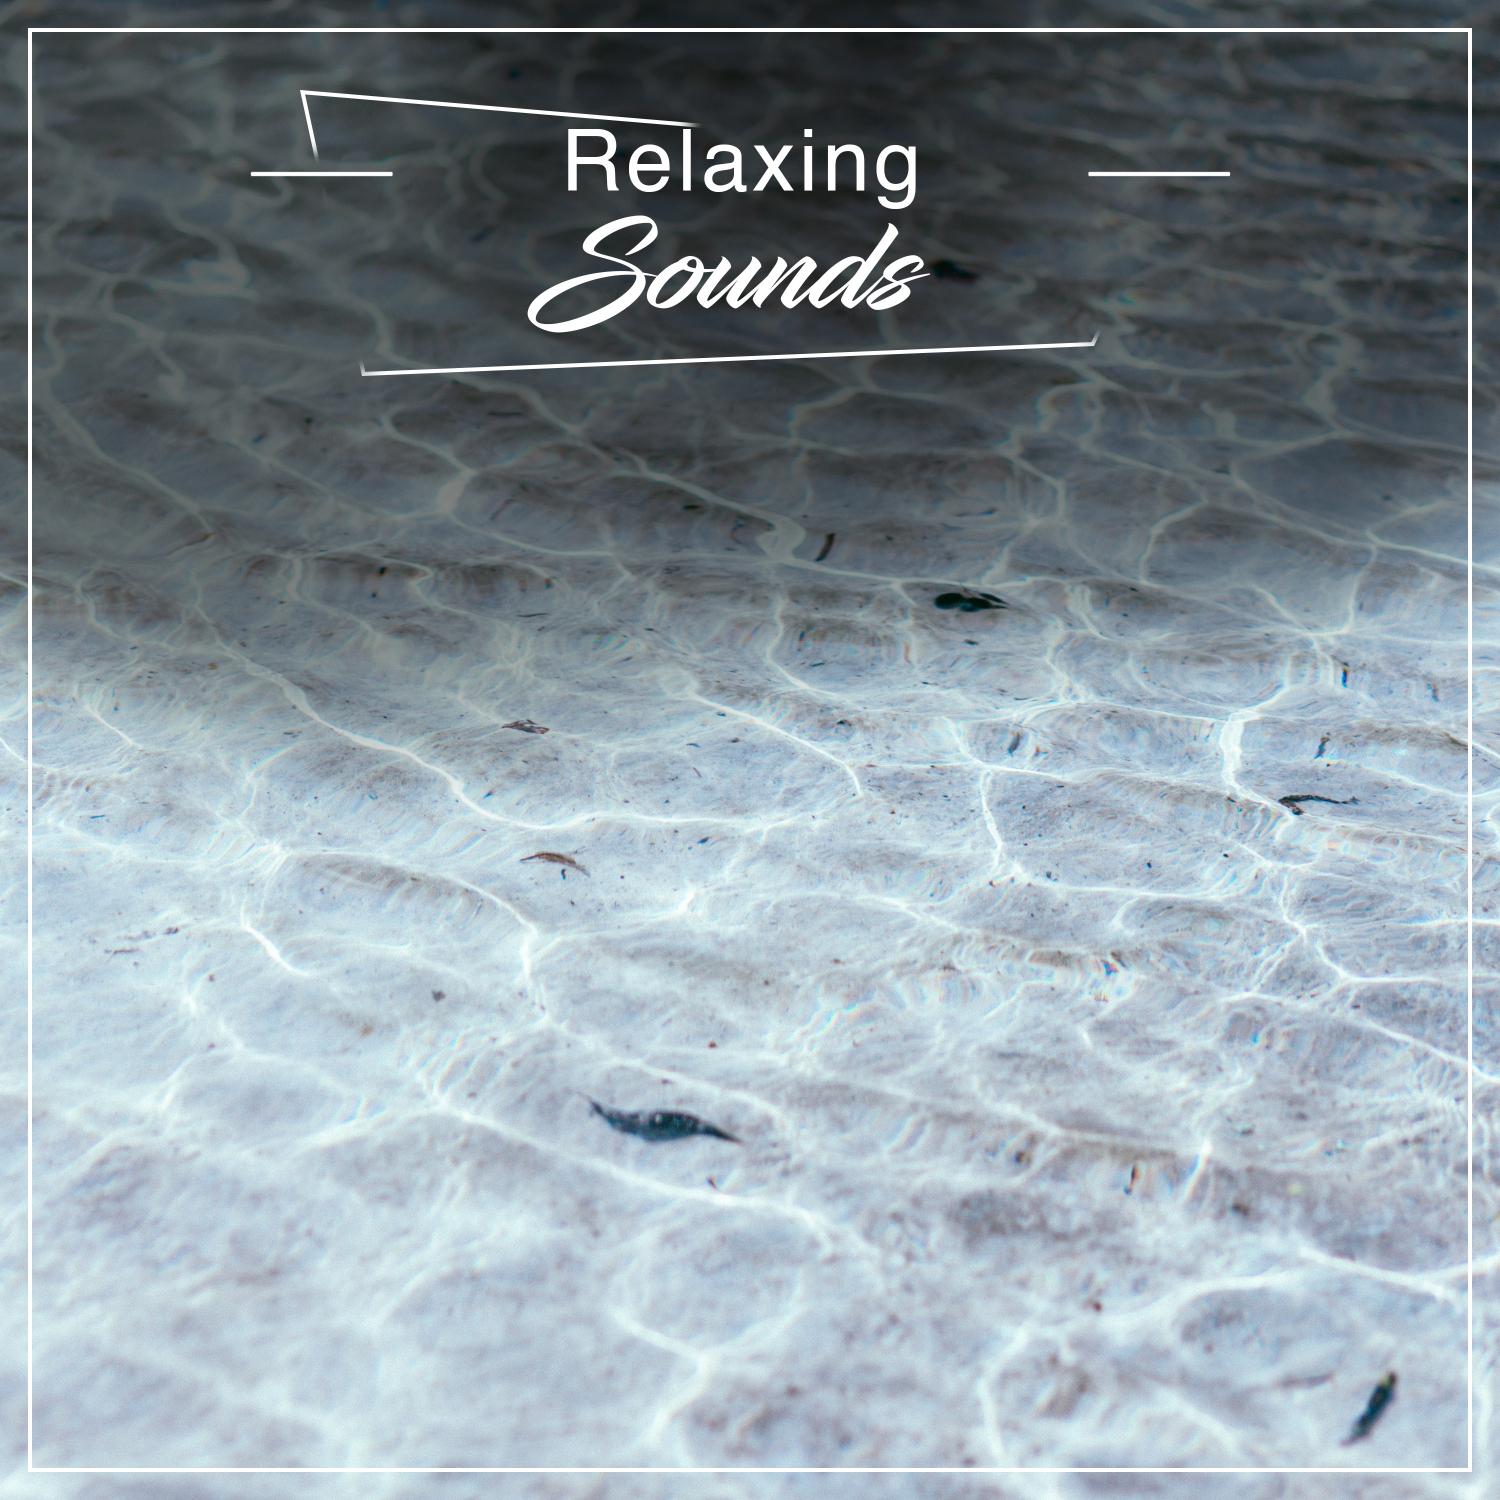 12 Relaxing Sounds to Calm your Brain